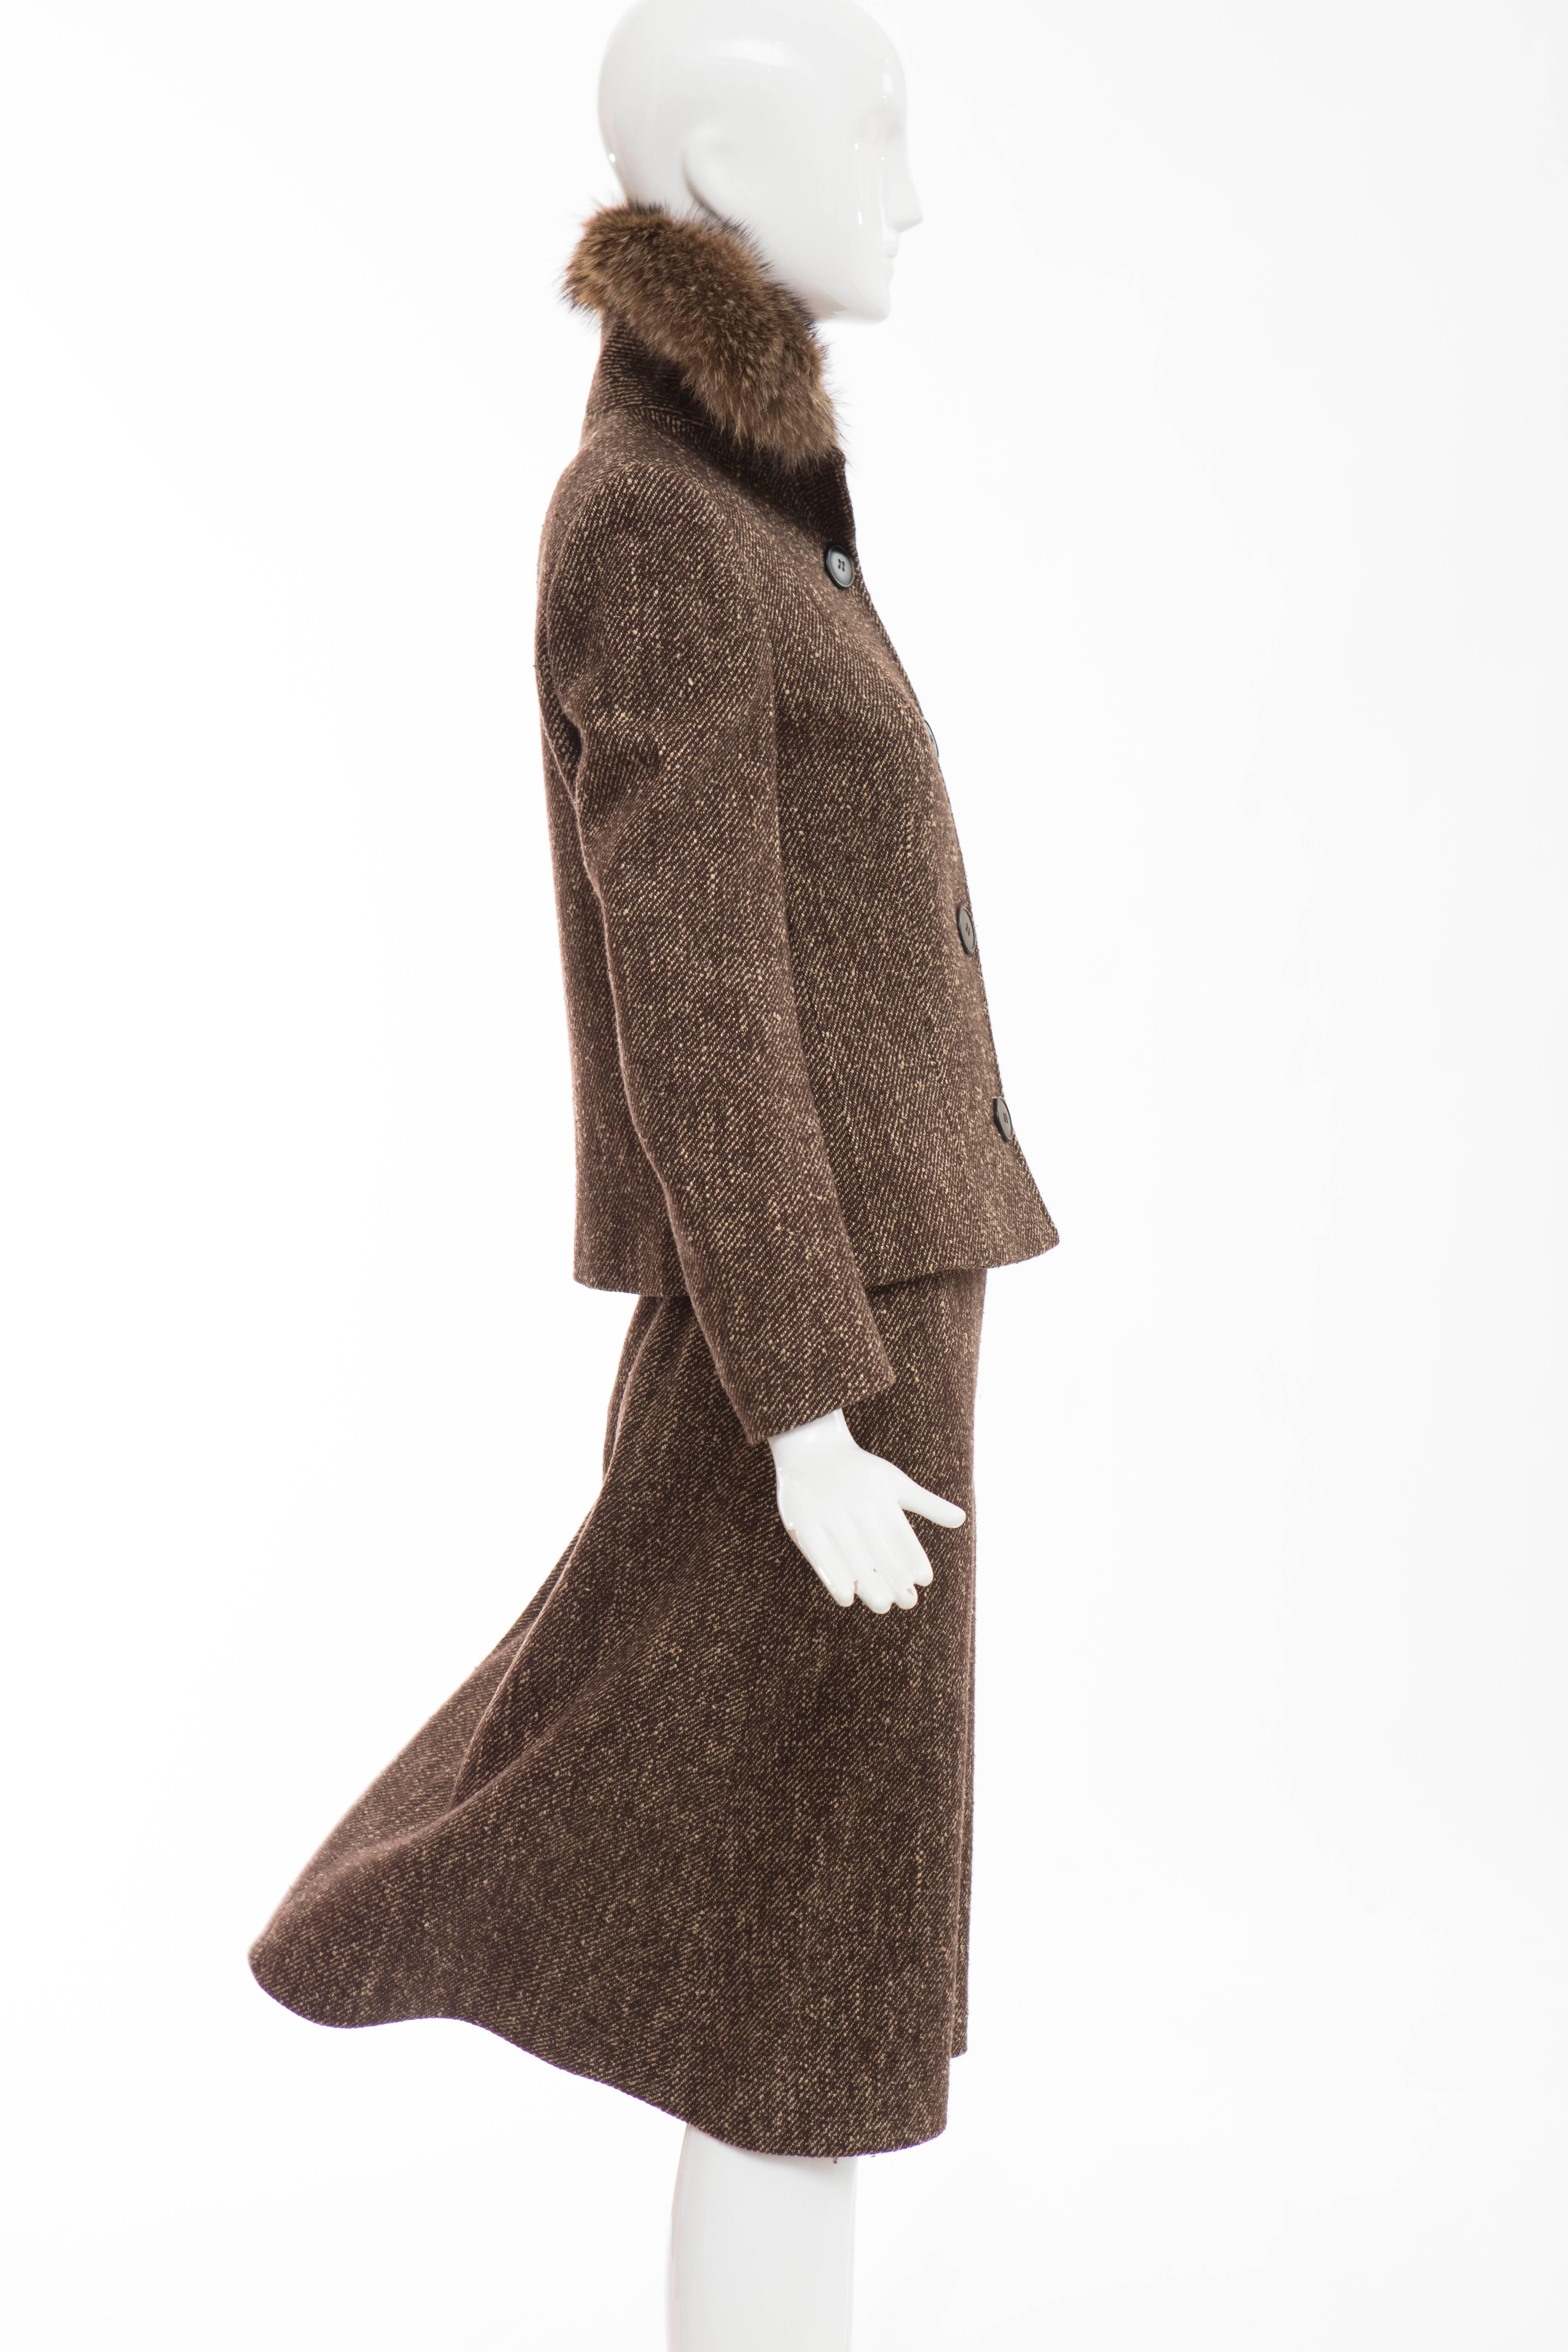 Dolce & Gabbana Brown Tweed Skirt Suit With Fur Collar For Sale 1